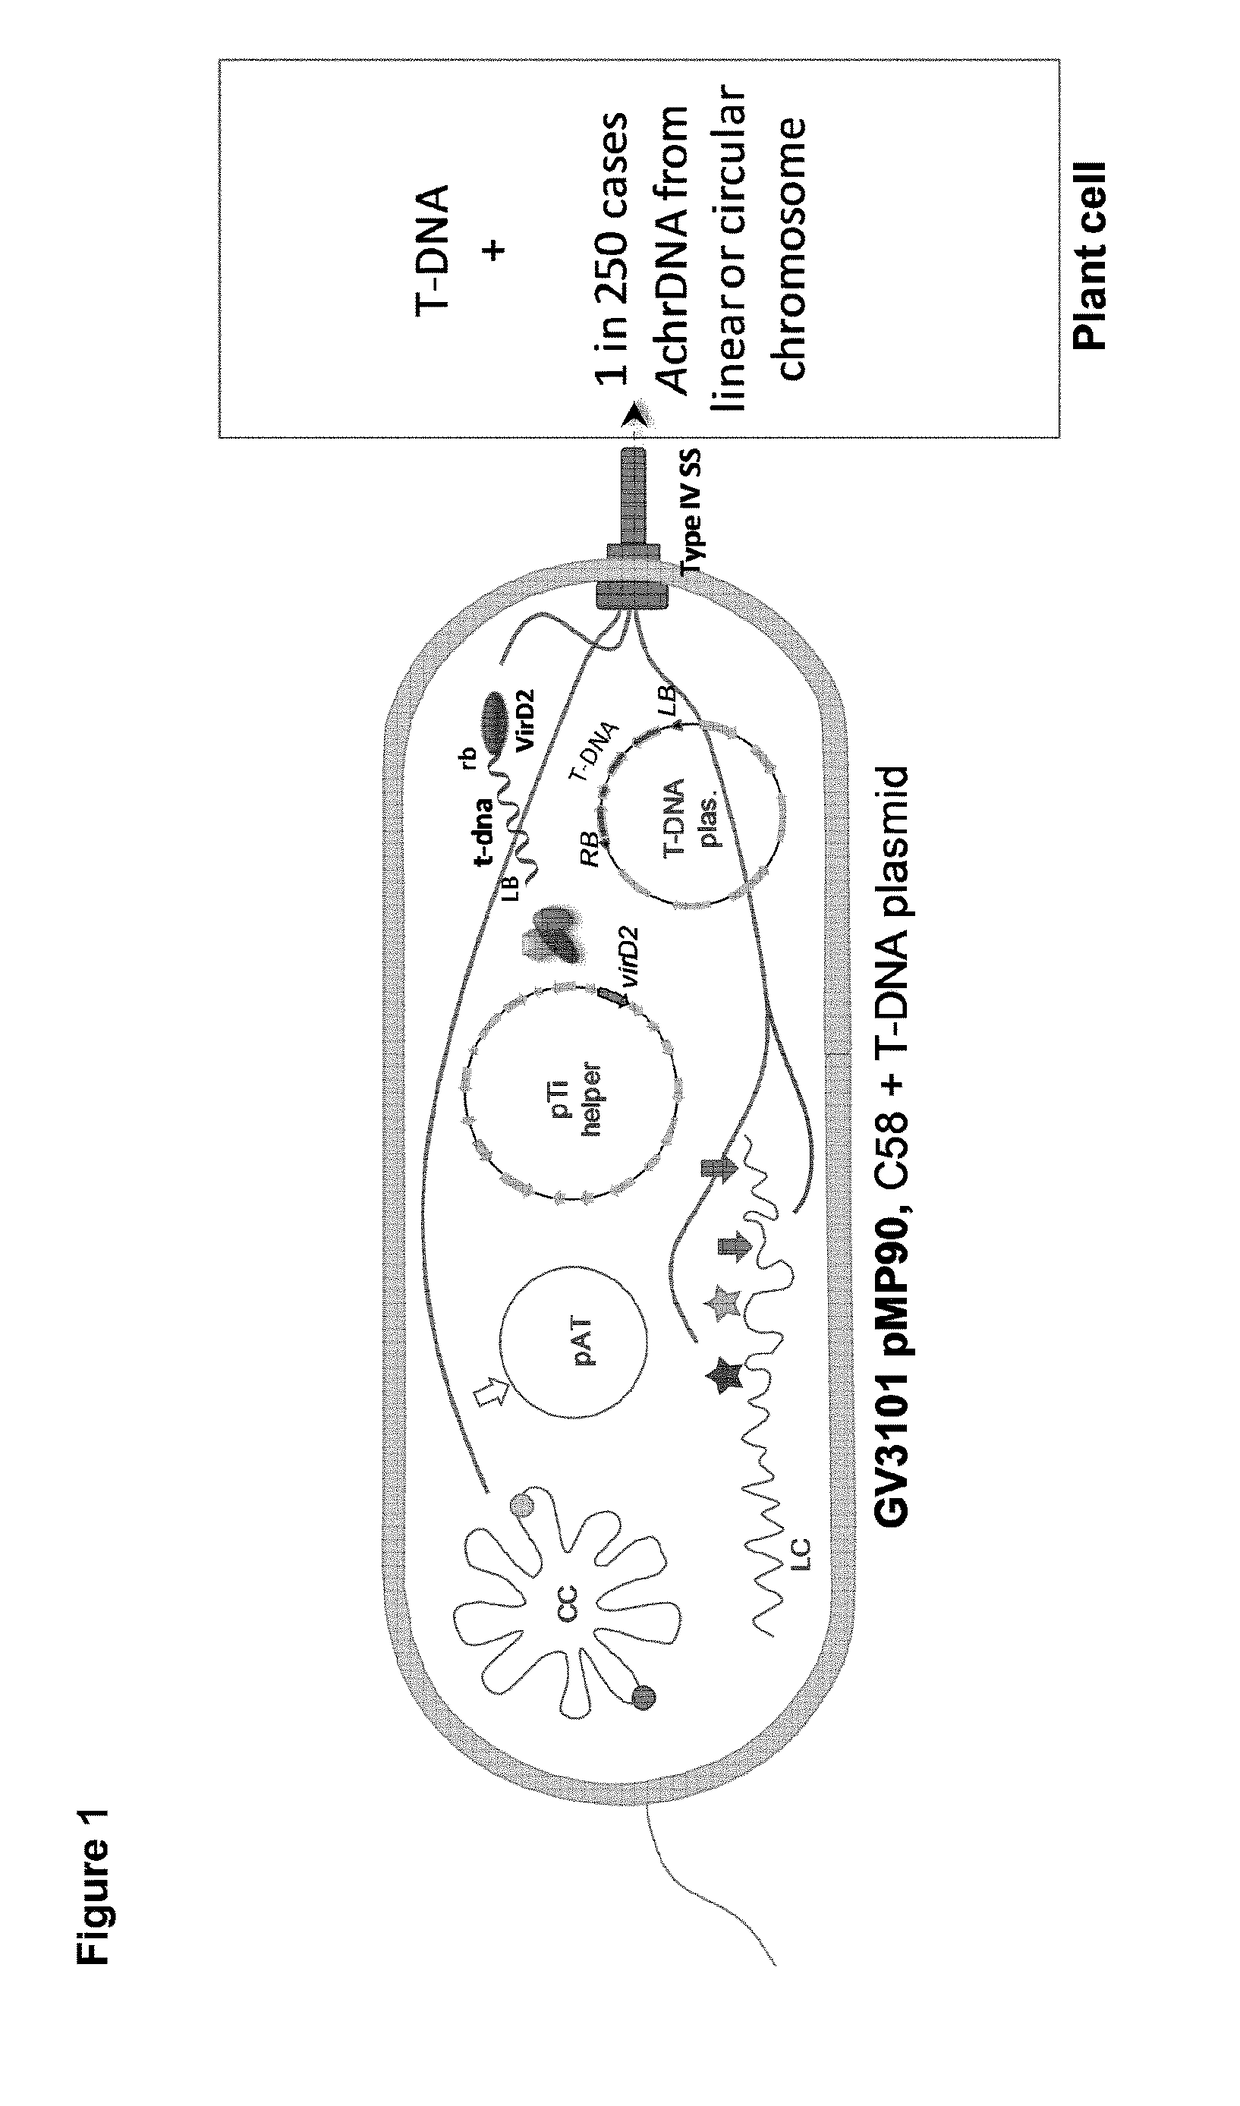 Improved strains of agrobacterium tumefaciens for transferring DNA into plants